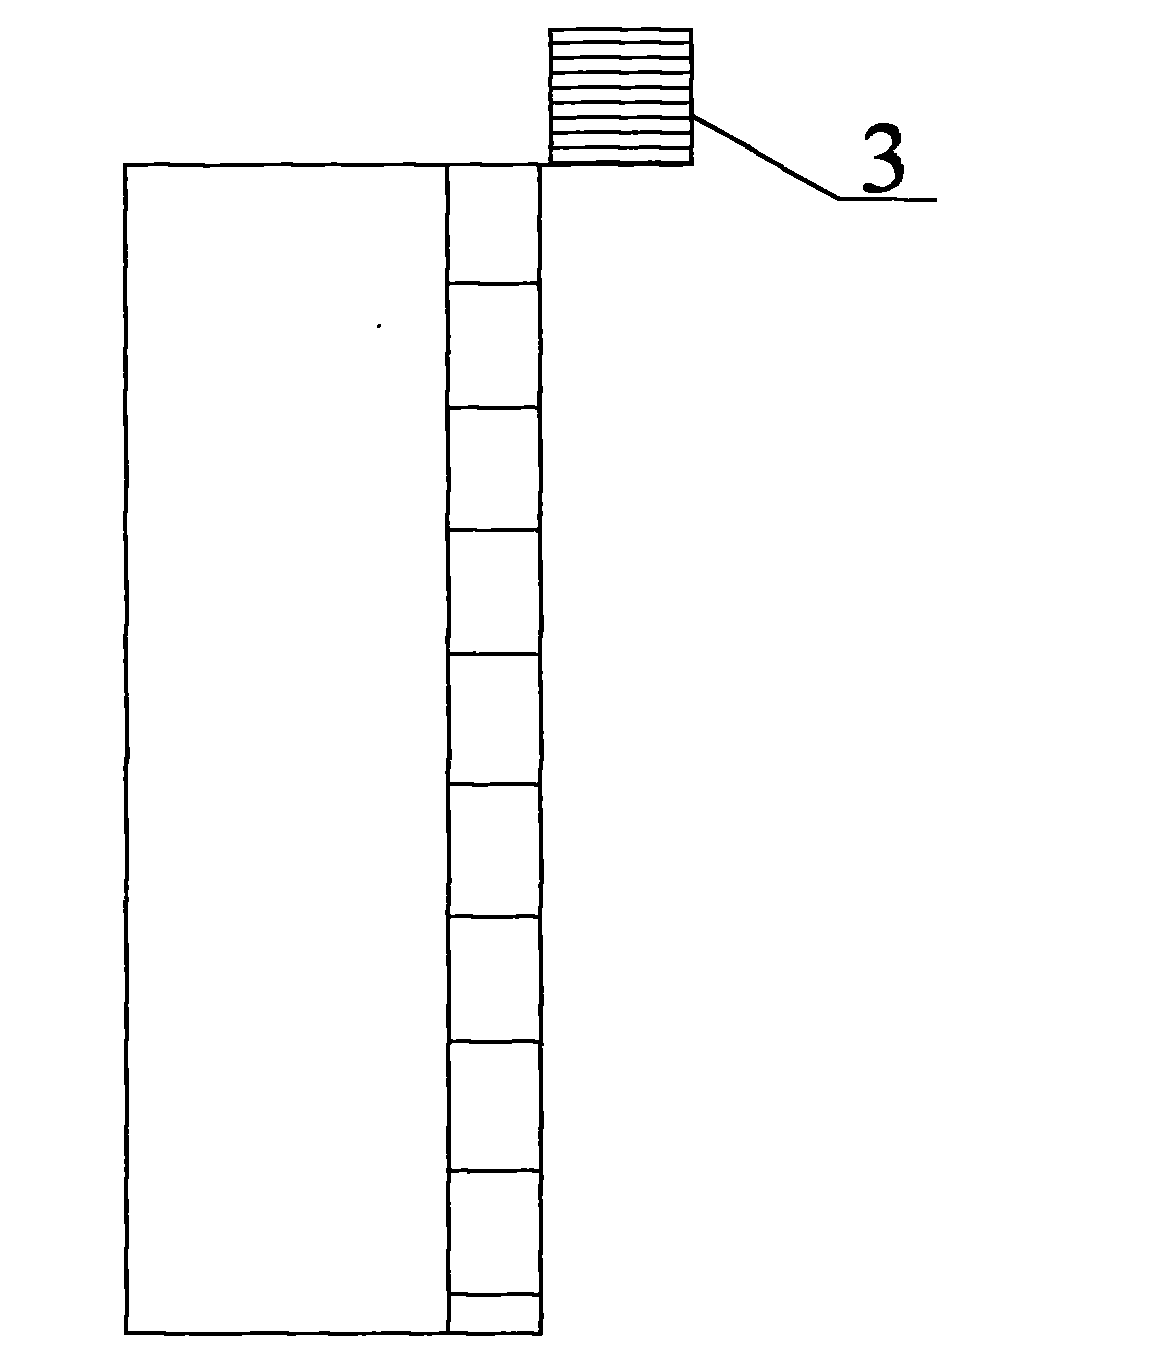 Telescopic type emergency escaping device for high-rise buildings